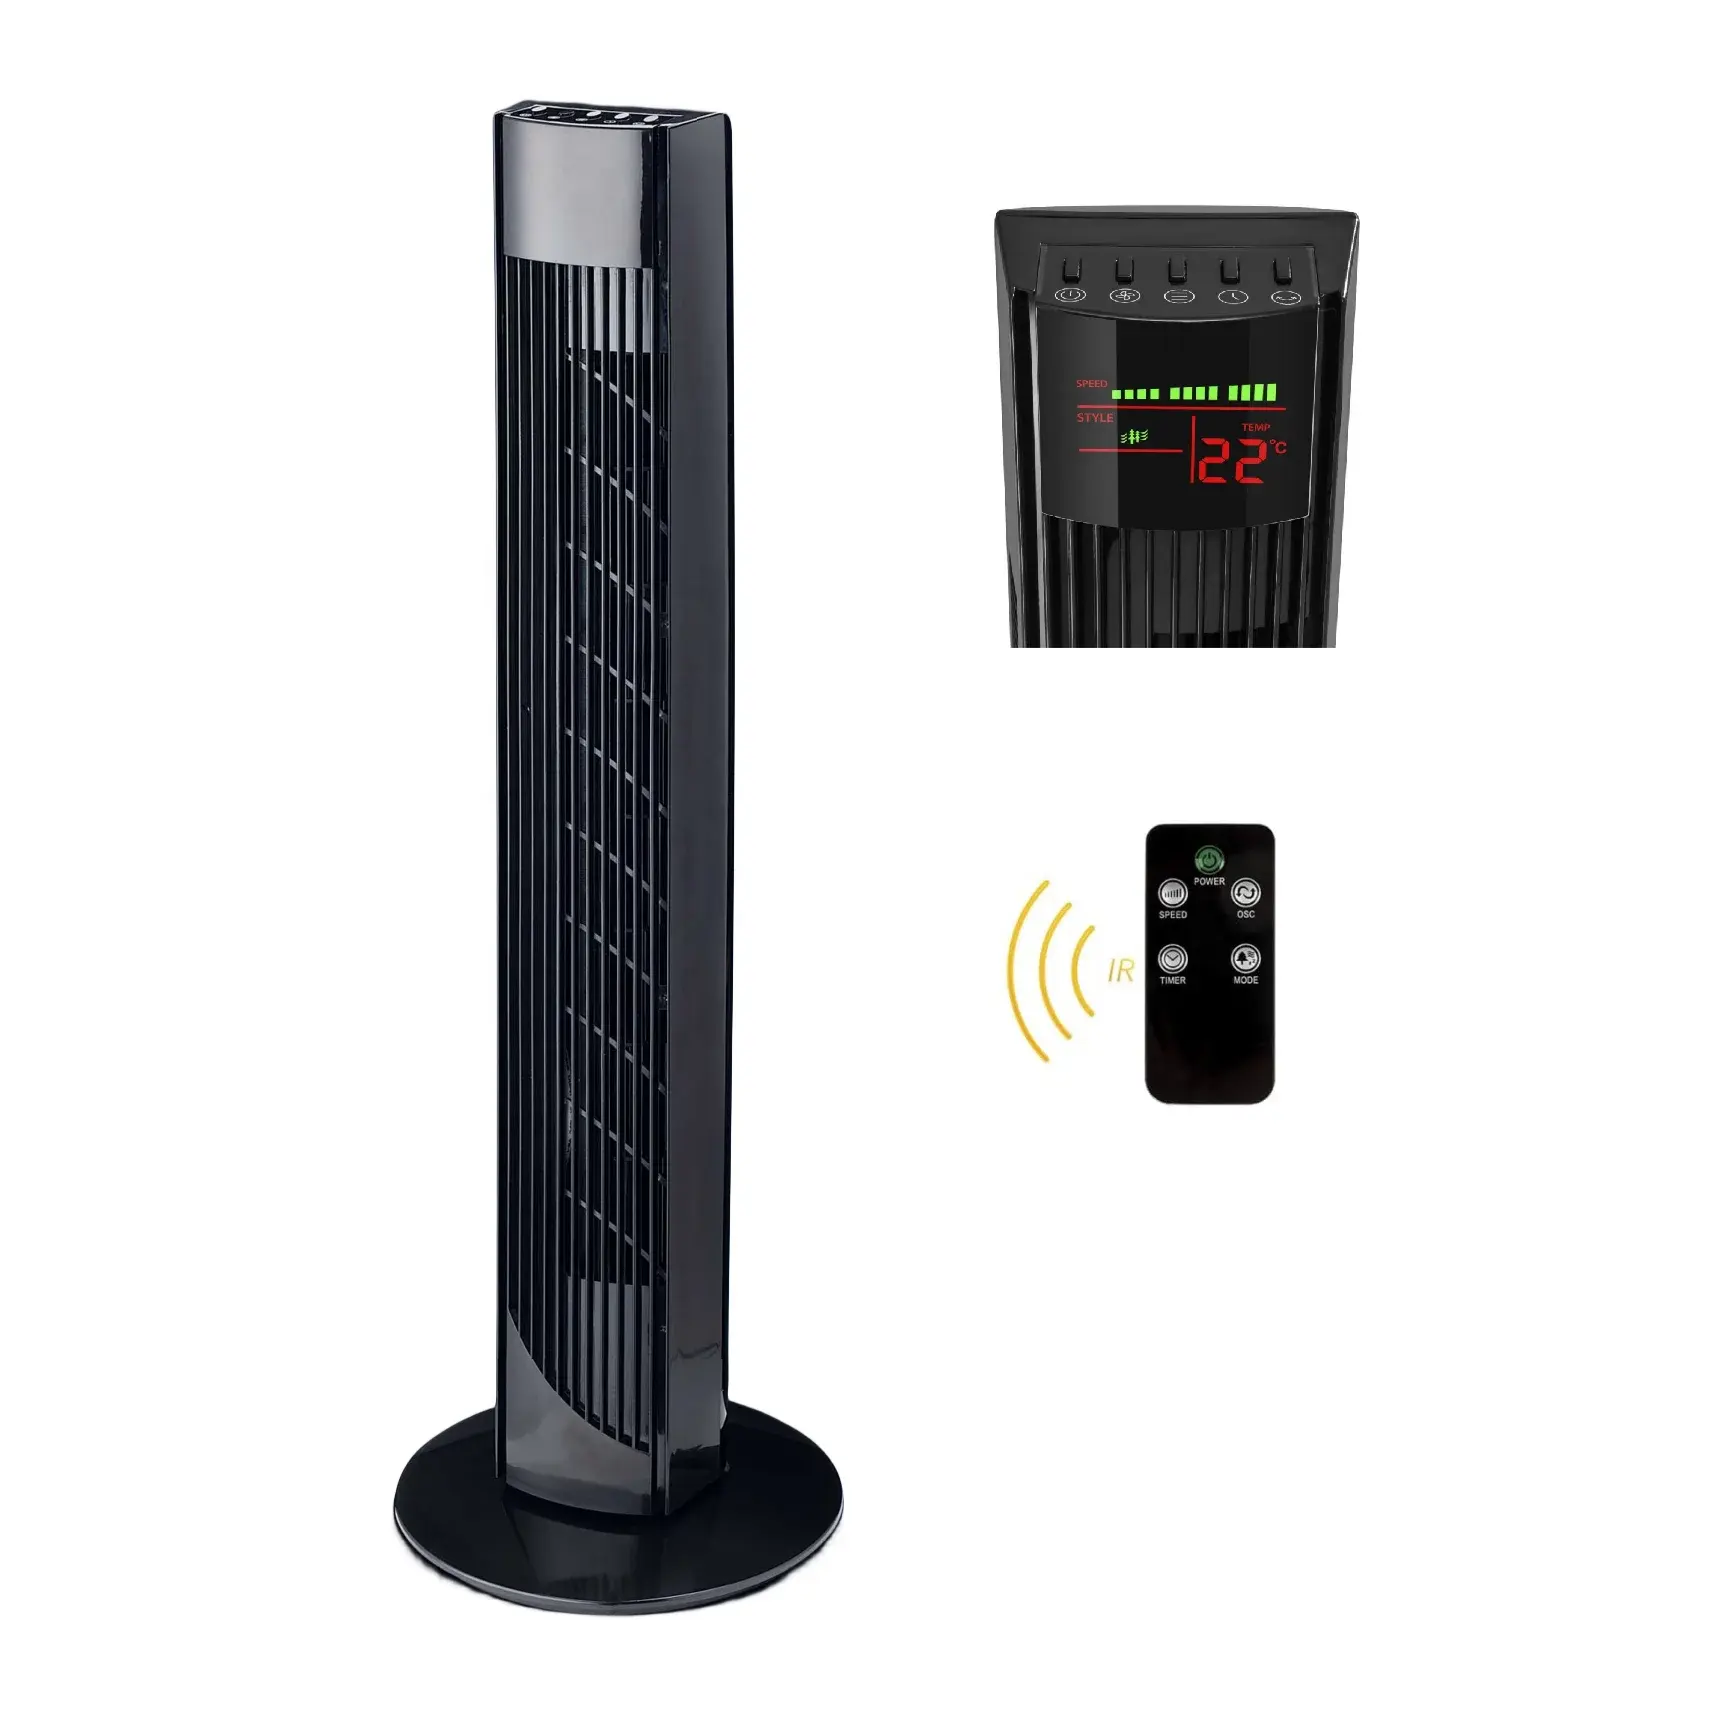 EAGLE GREE whole sales Pedestal Stand Fan Air Cooler leafless Fan Black Tower Fan for bedroom quite silent wind and remote